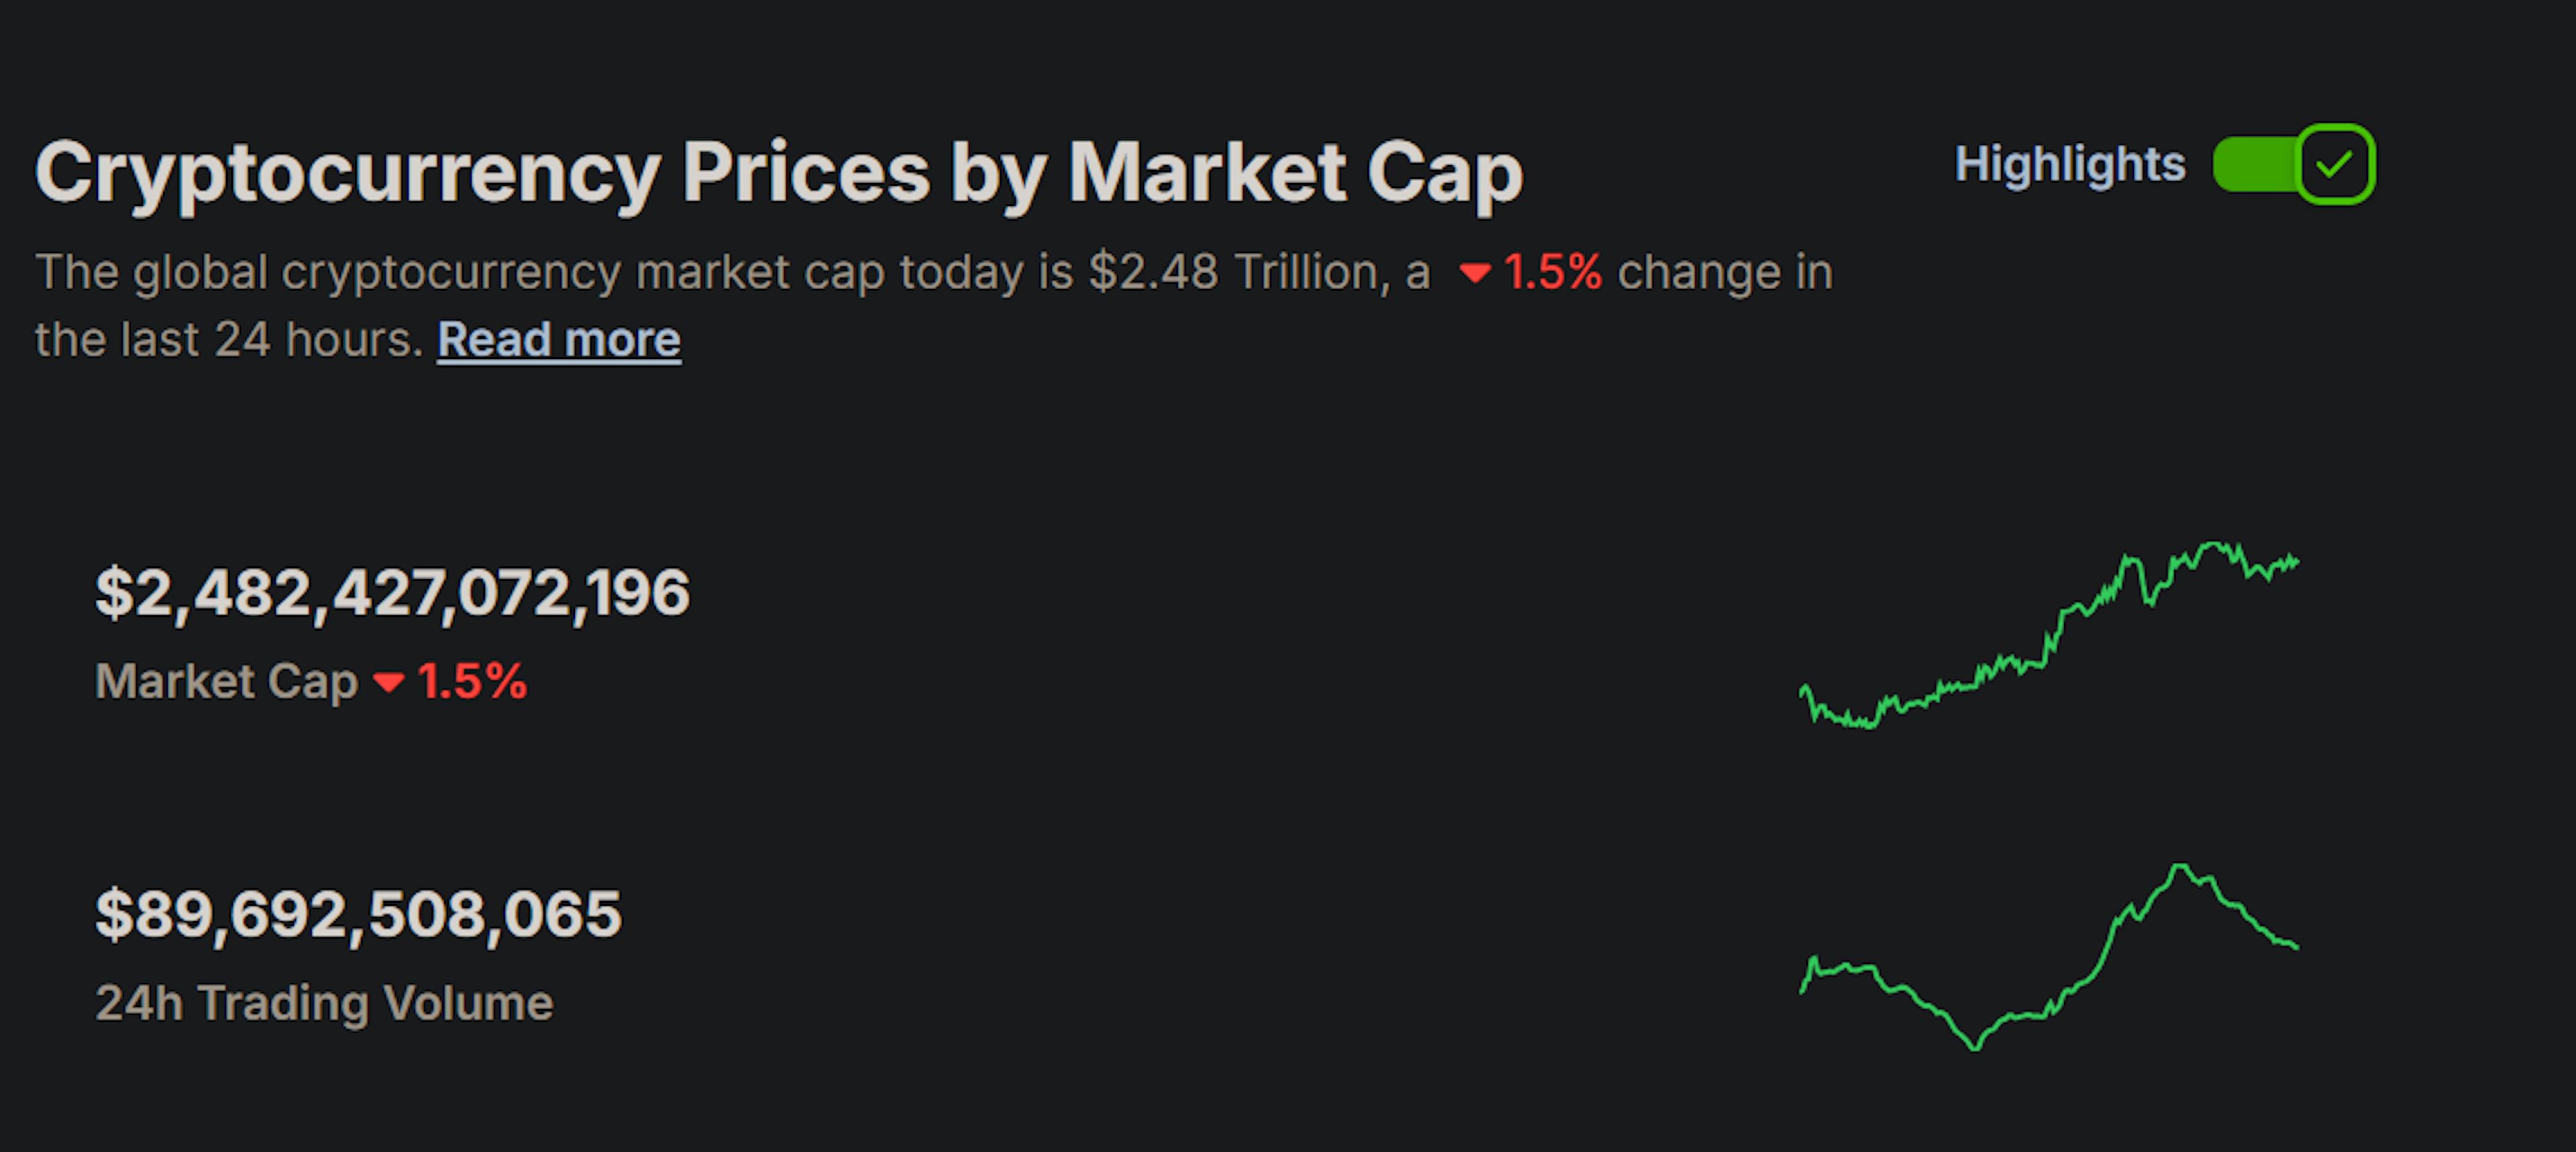 Cryptocurrency prices by market cap